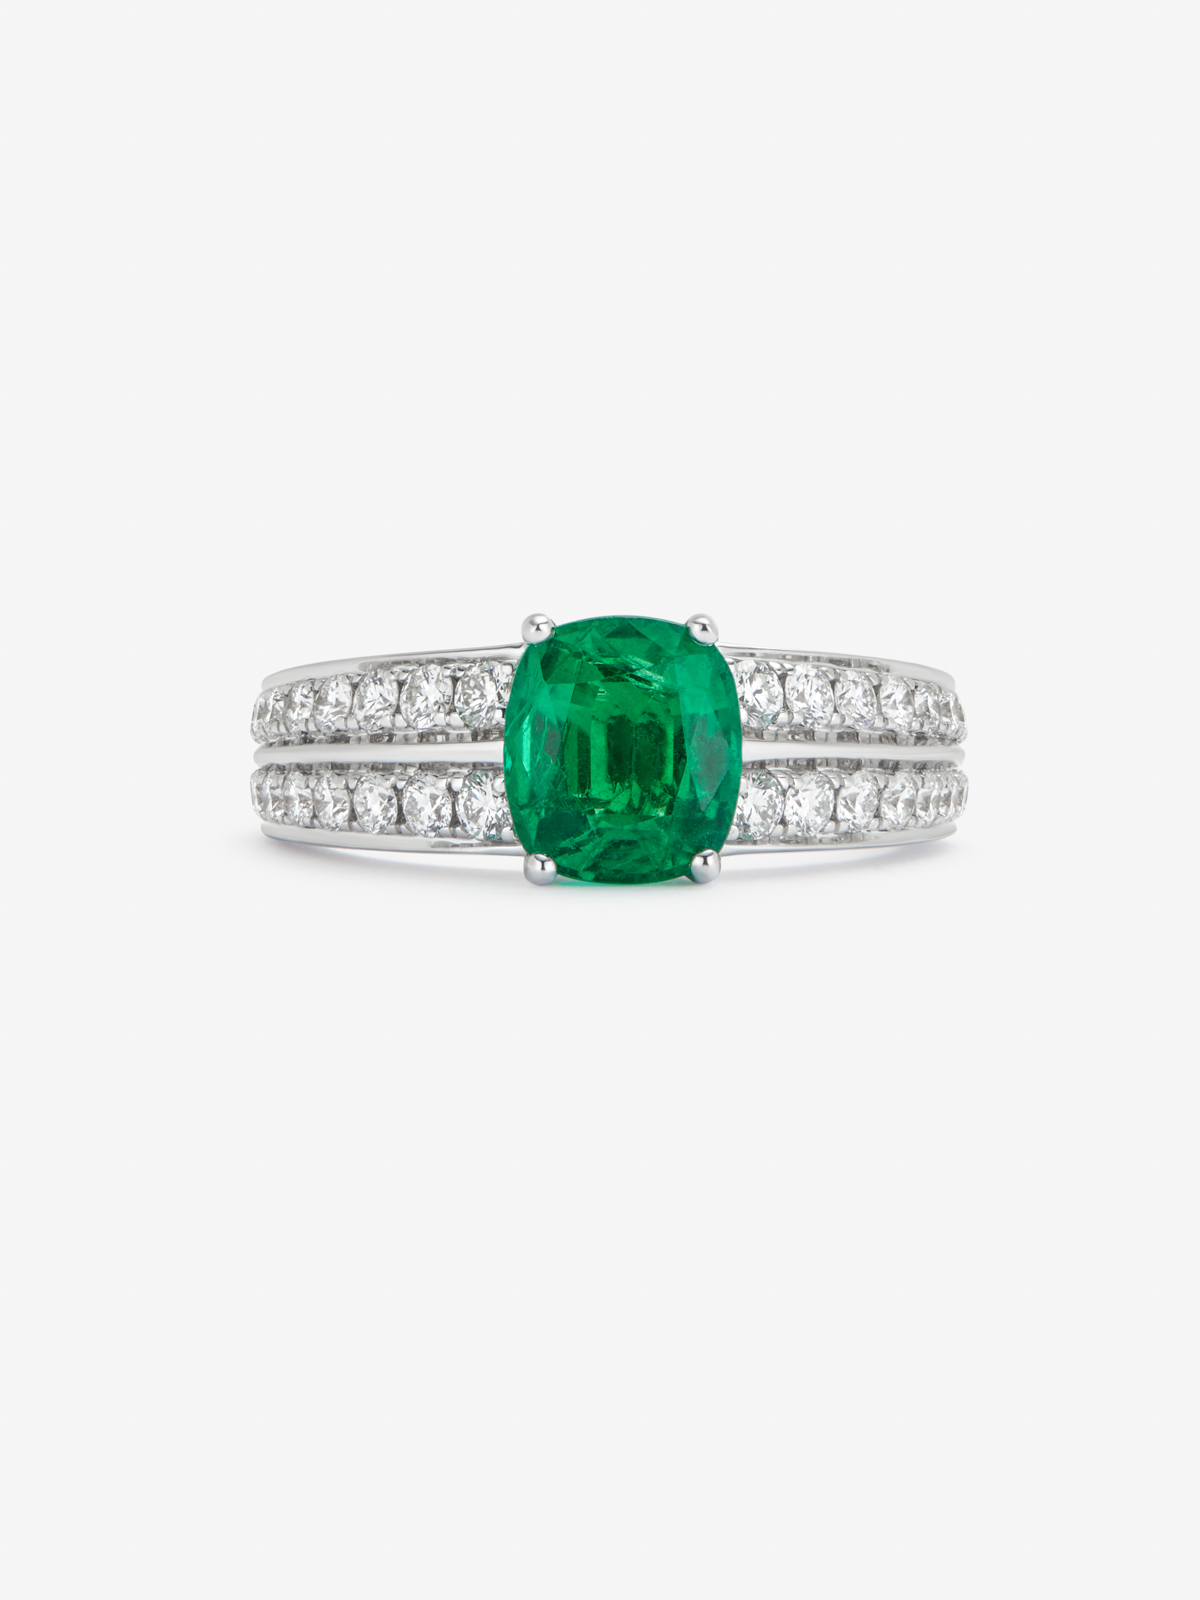 18K white gold ring with cushion-cut emerald of 1,563 cts and 36 brilliant-cut diamonds with a total of 0.64 cts